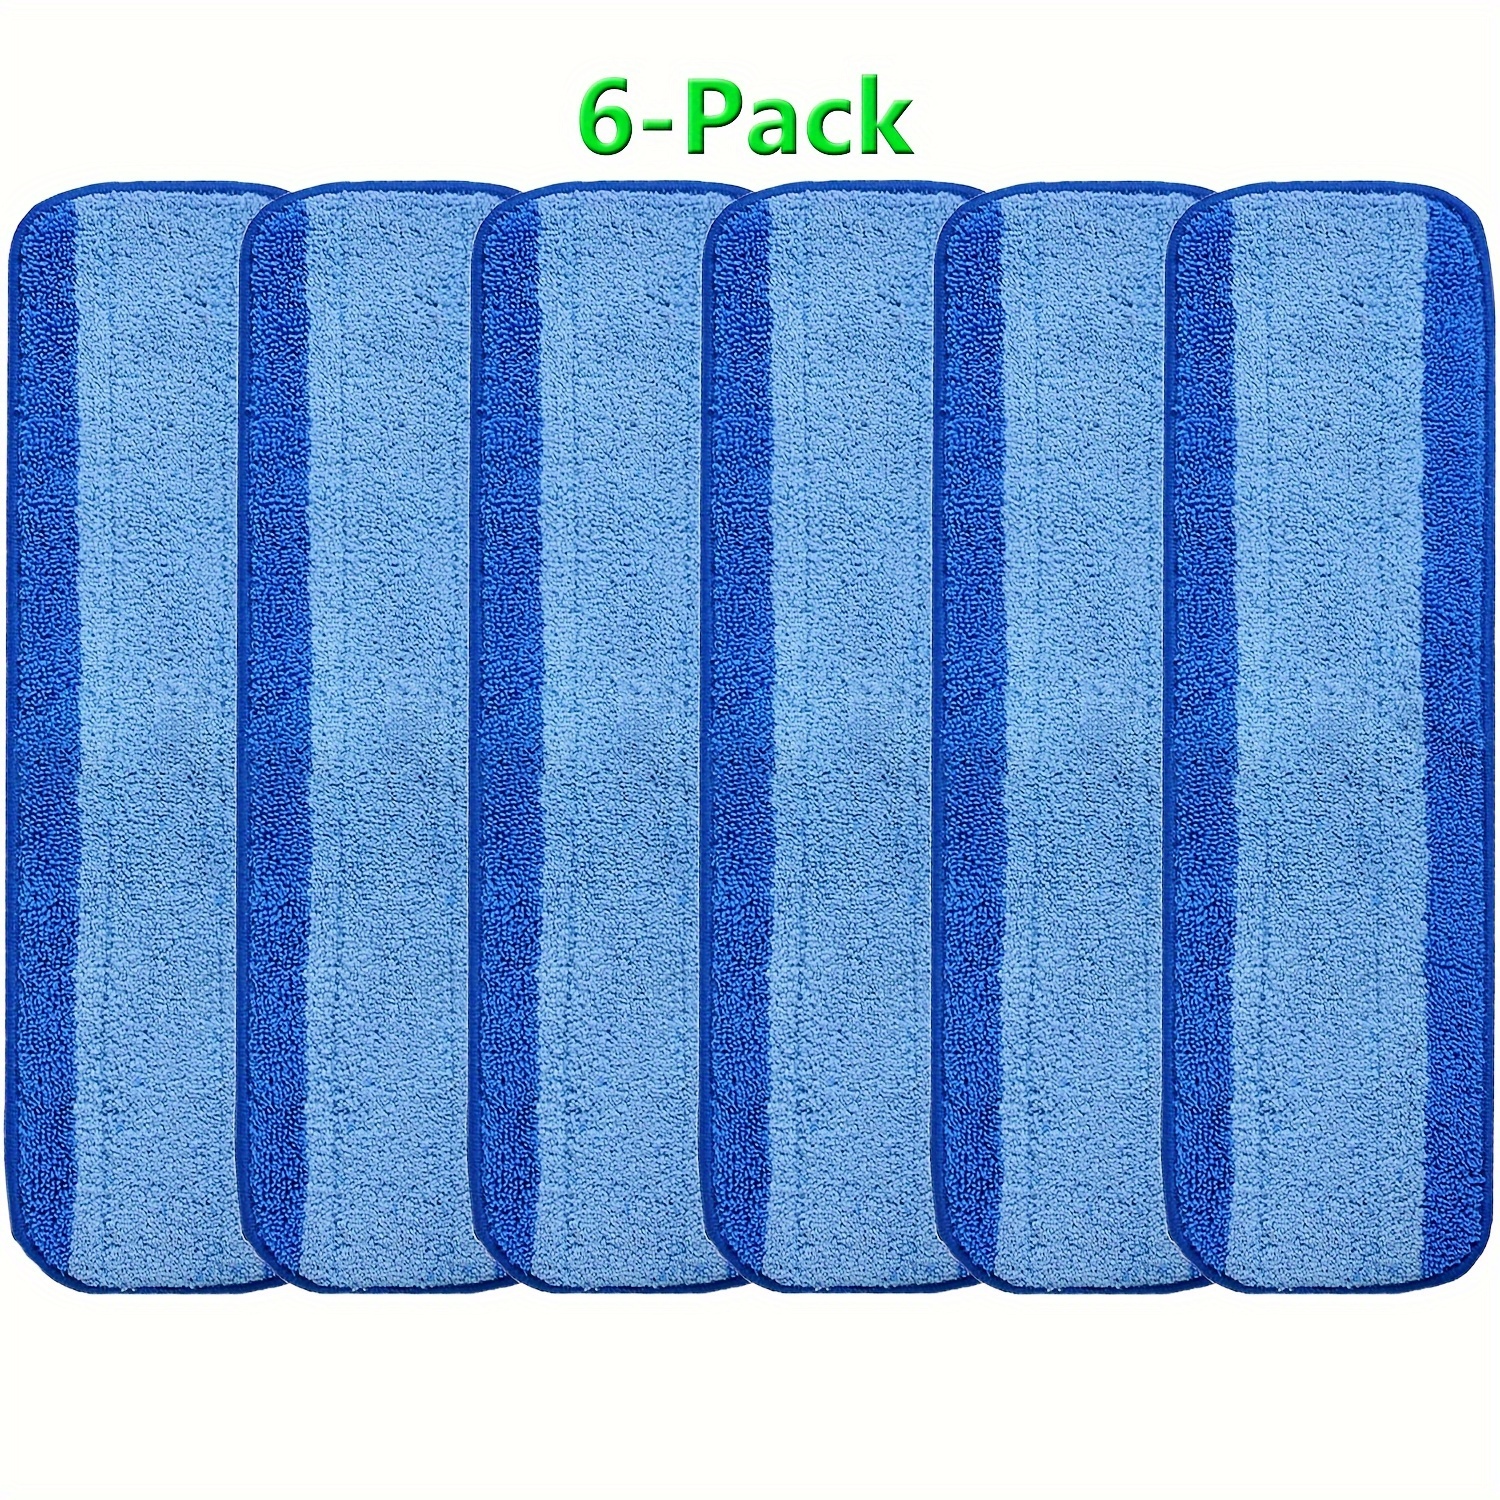 18 Microfiber Wet Mop Pads  Replacement Pads (3 Pack